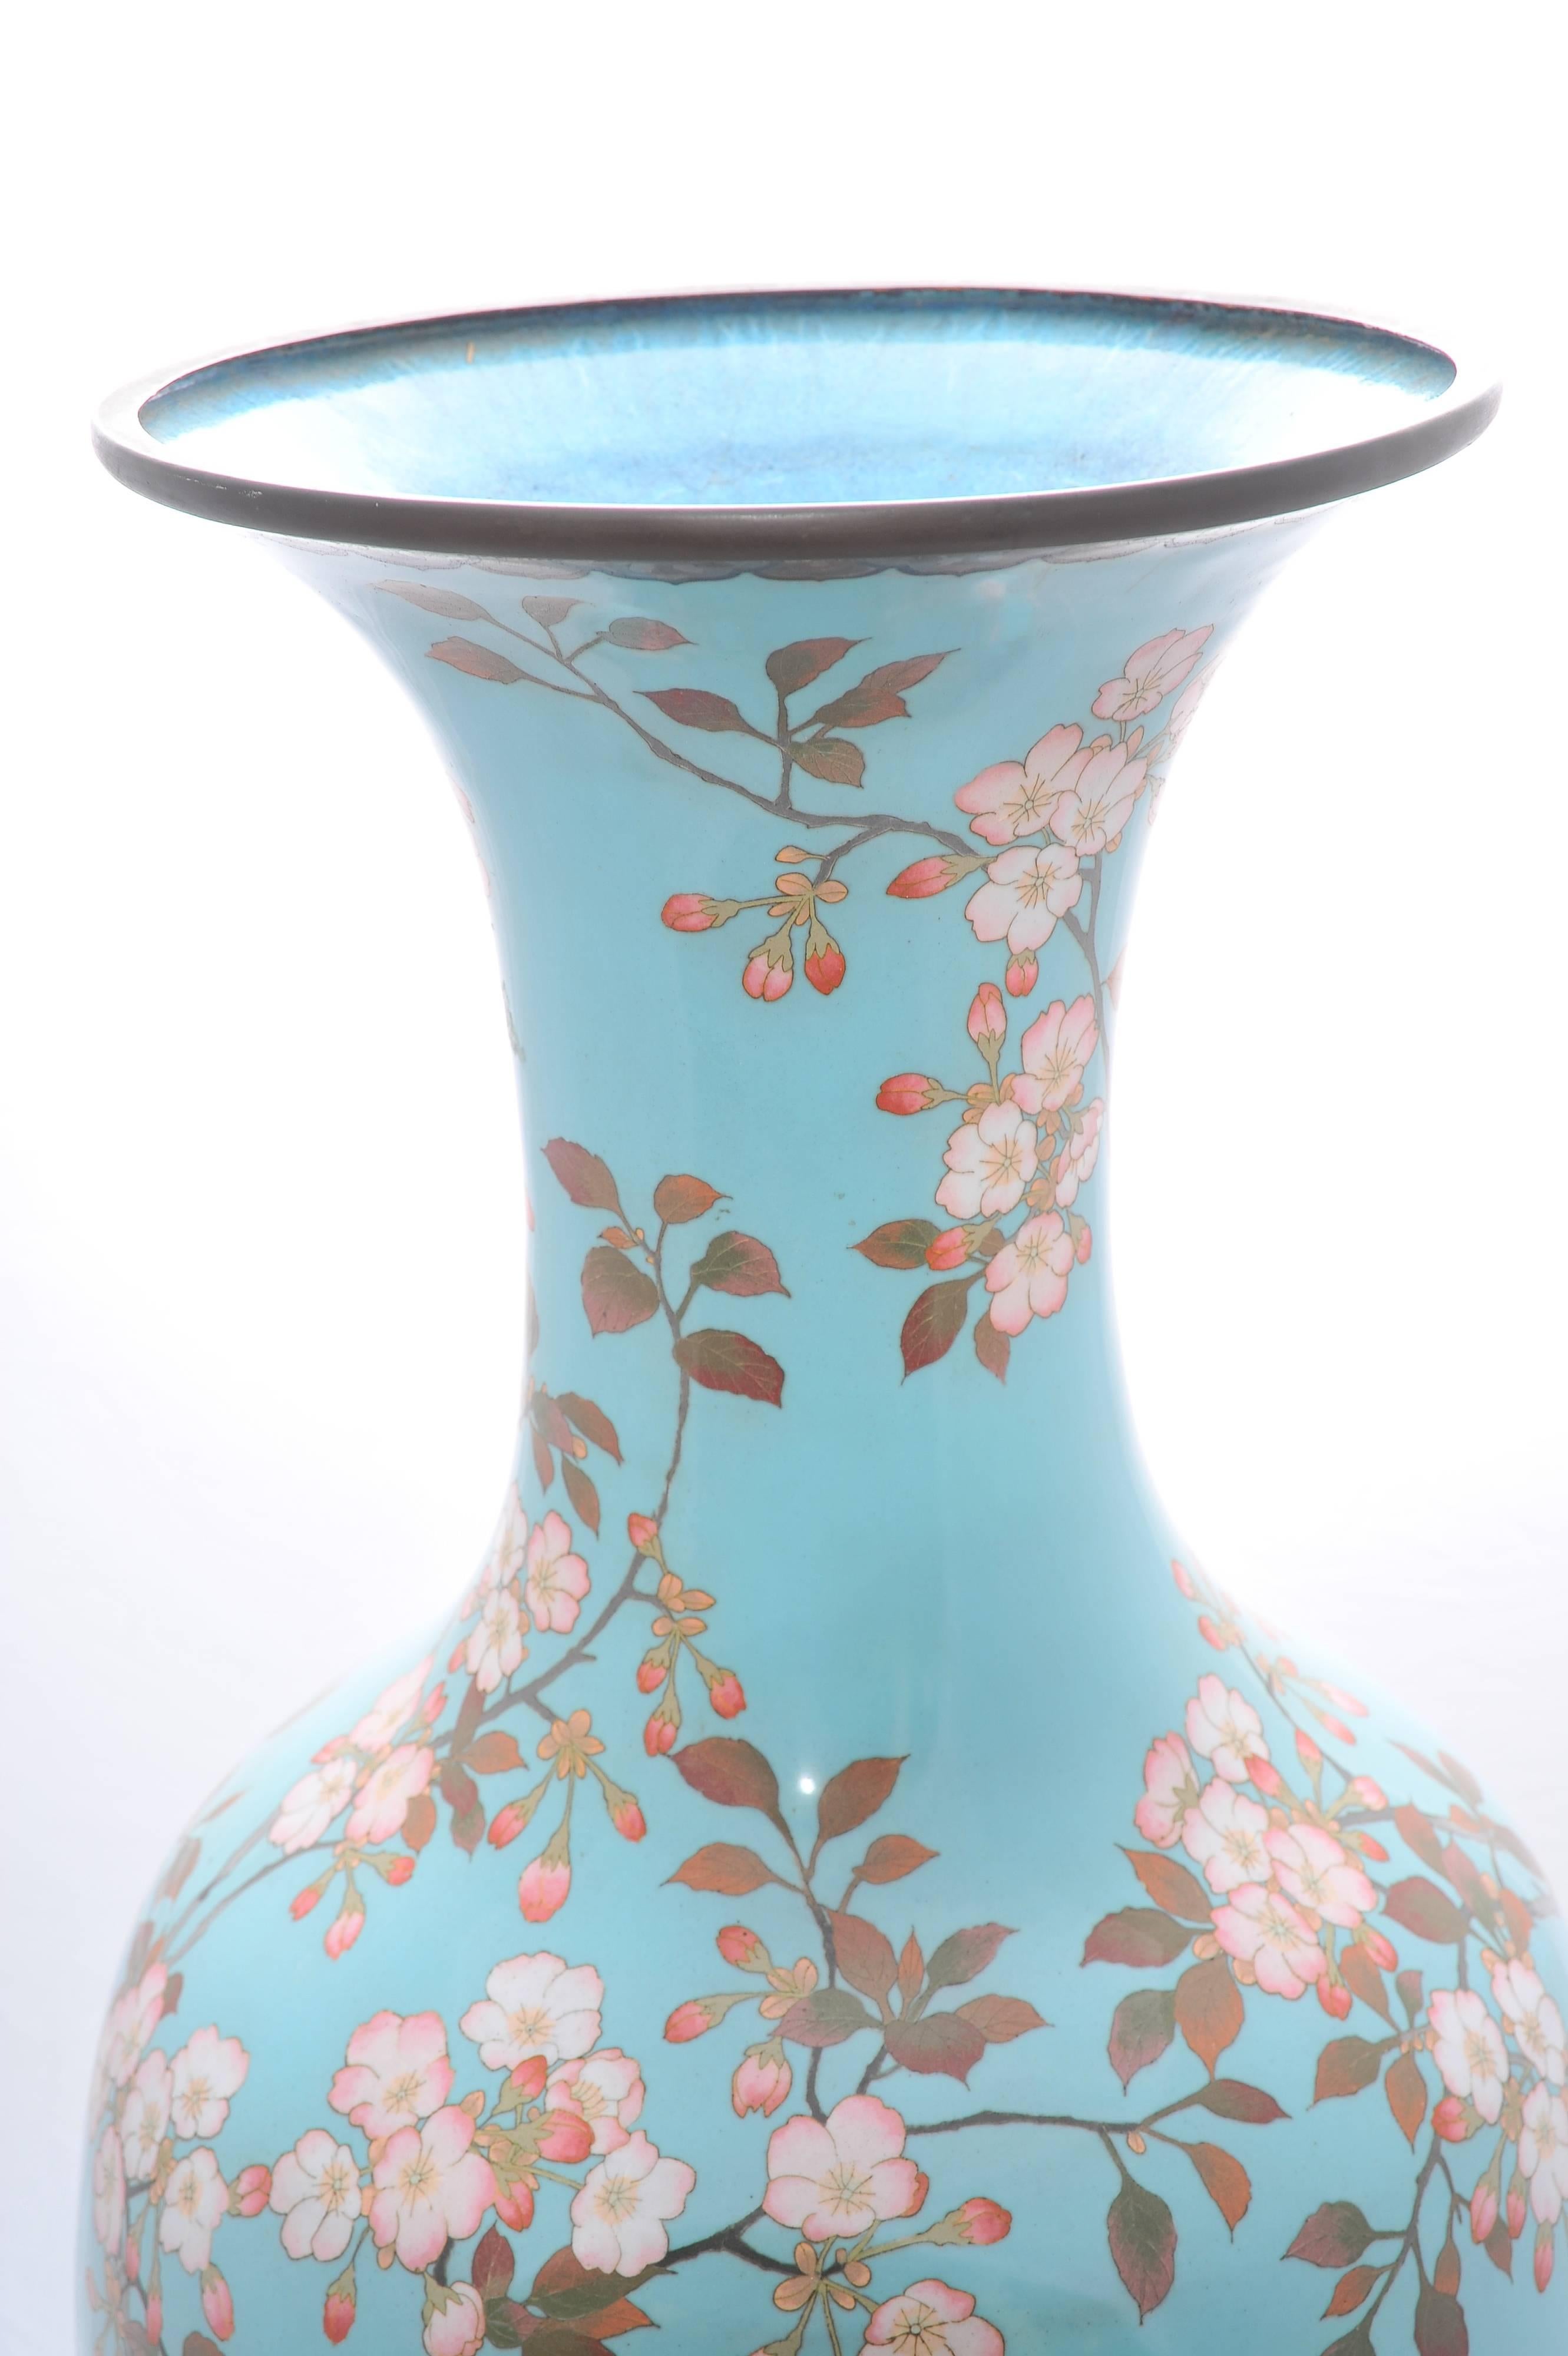 A large good quality Japanese Meiji period (1868-1920) cloisonné vase, having a light blue background, classical flower and foliate decoration with birds perched or flying around.